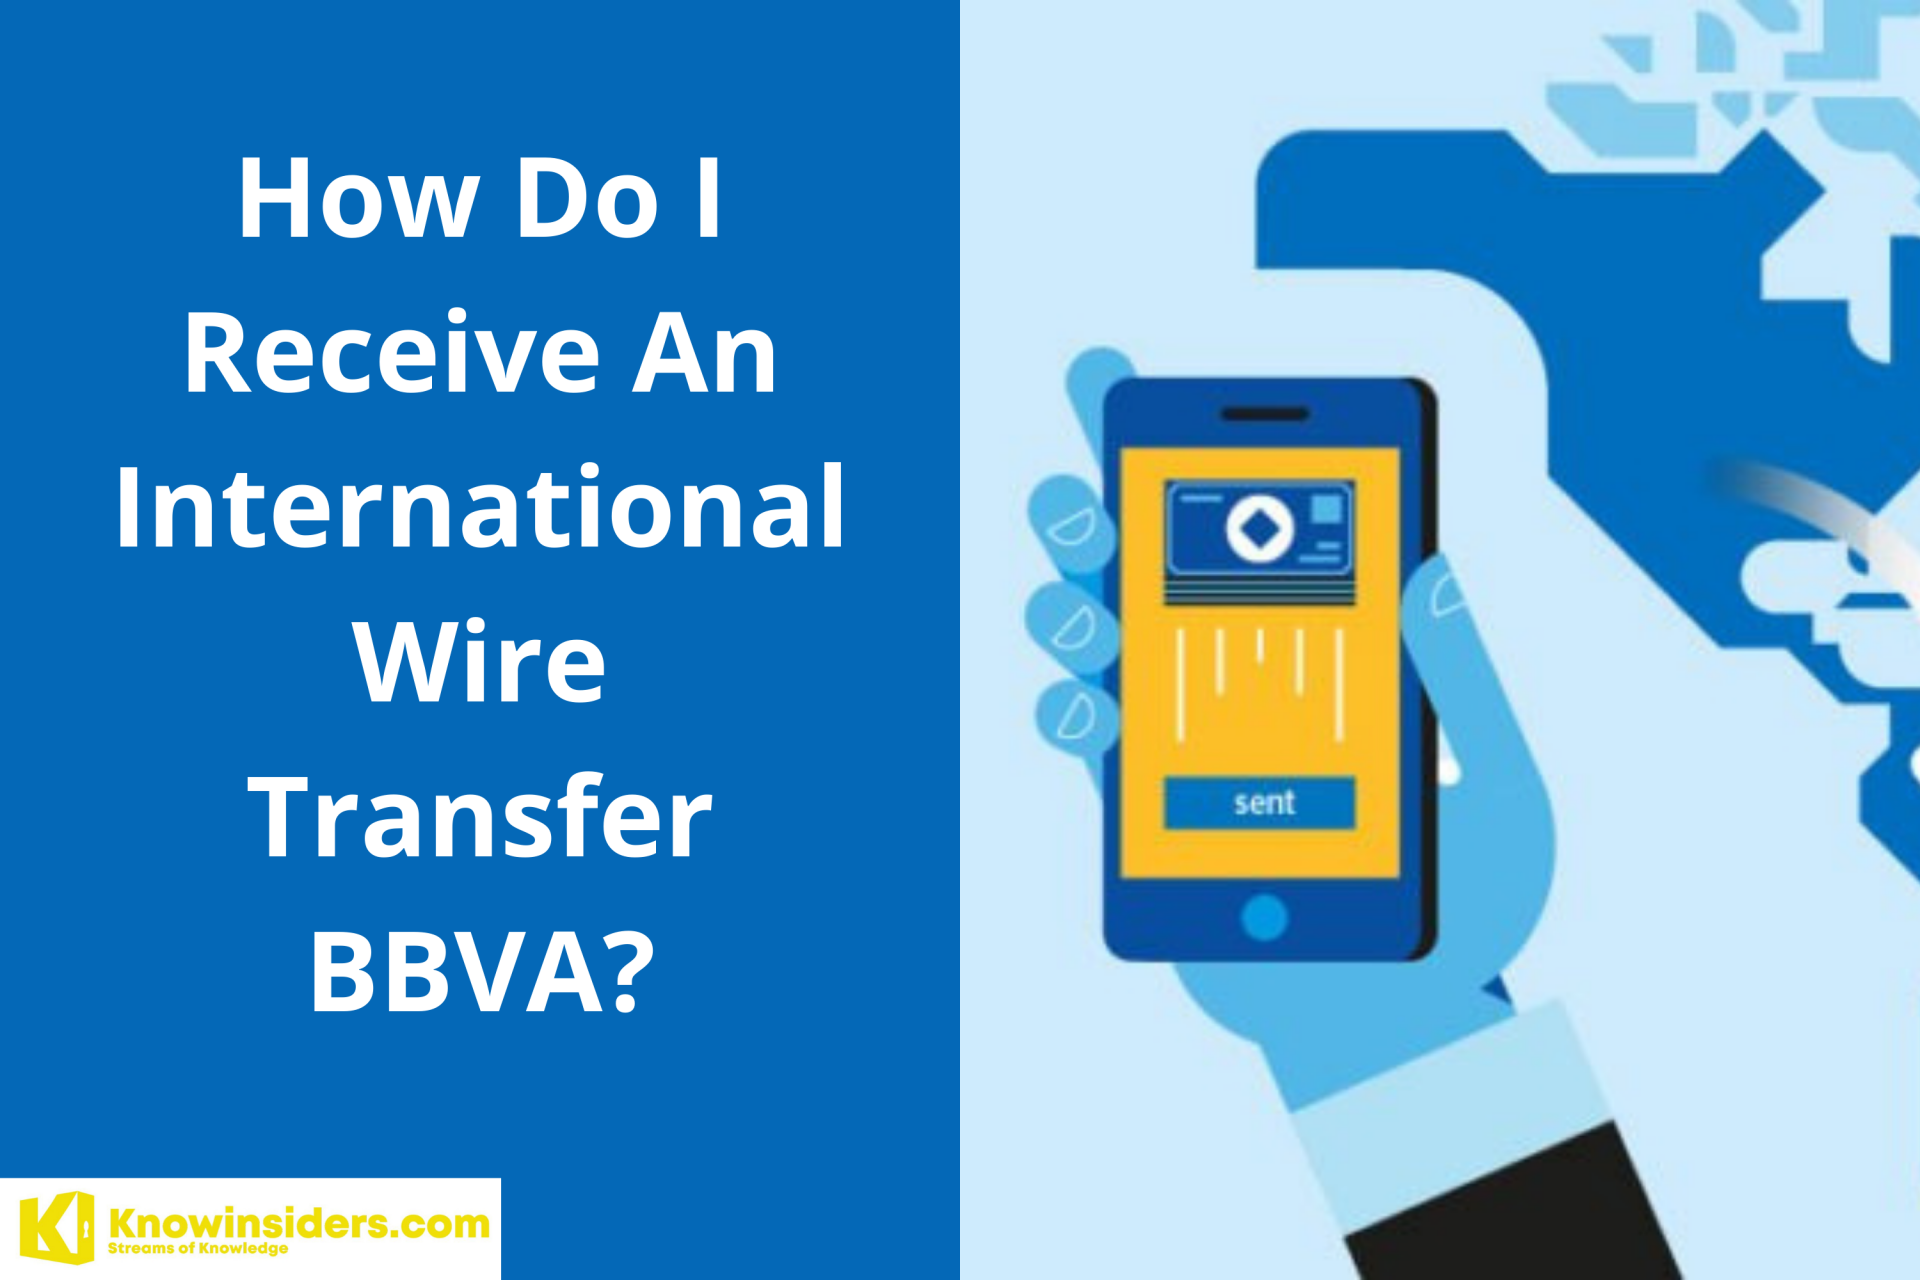 How to Receive An International Wire Transfer BBVA's Banking Services?